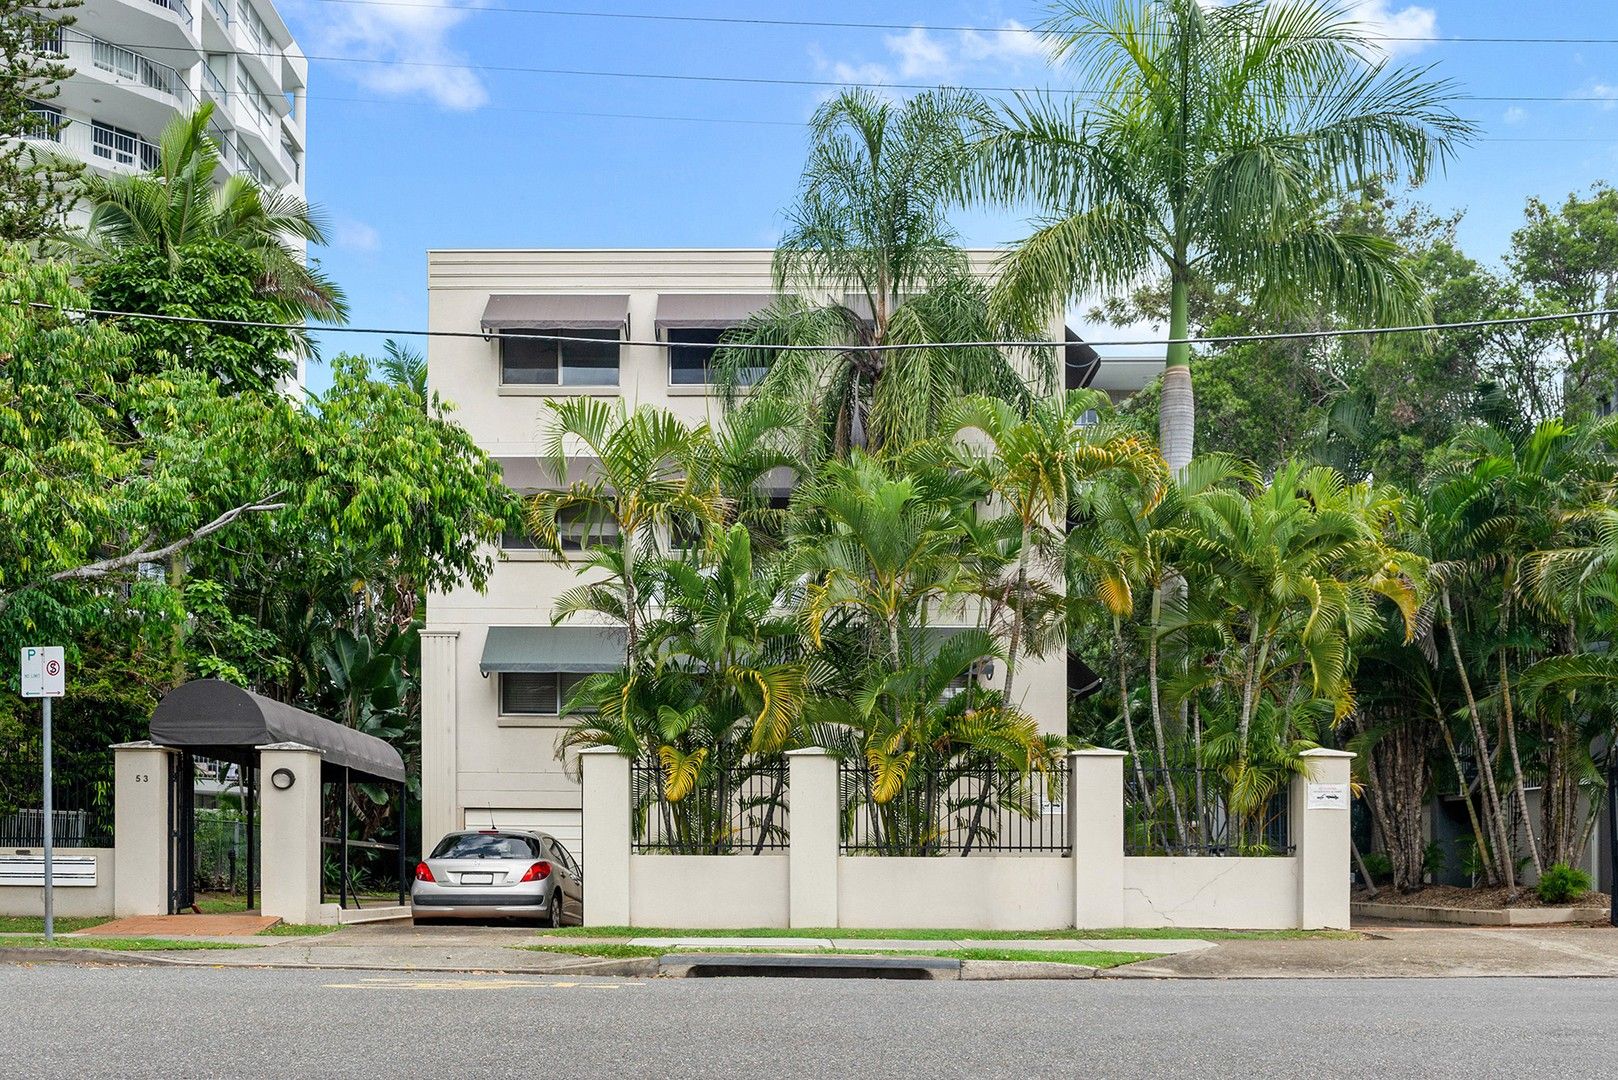 2 bedrooms House in 7/53 Thorn Street KANGAROO POINT QLD, 4169